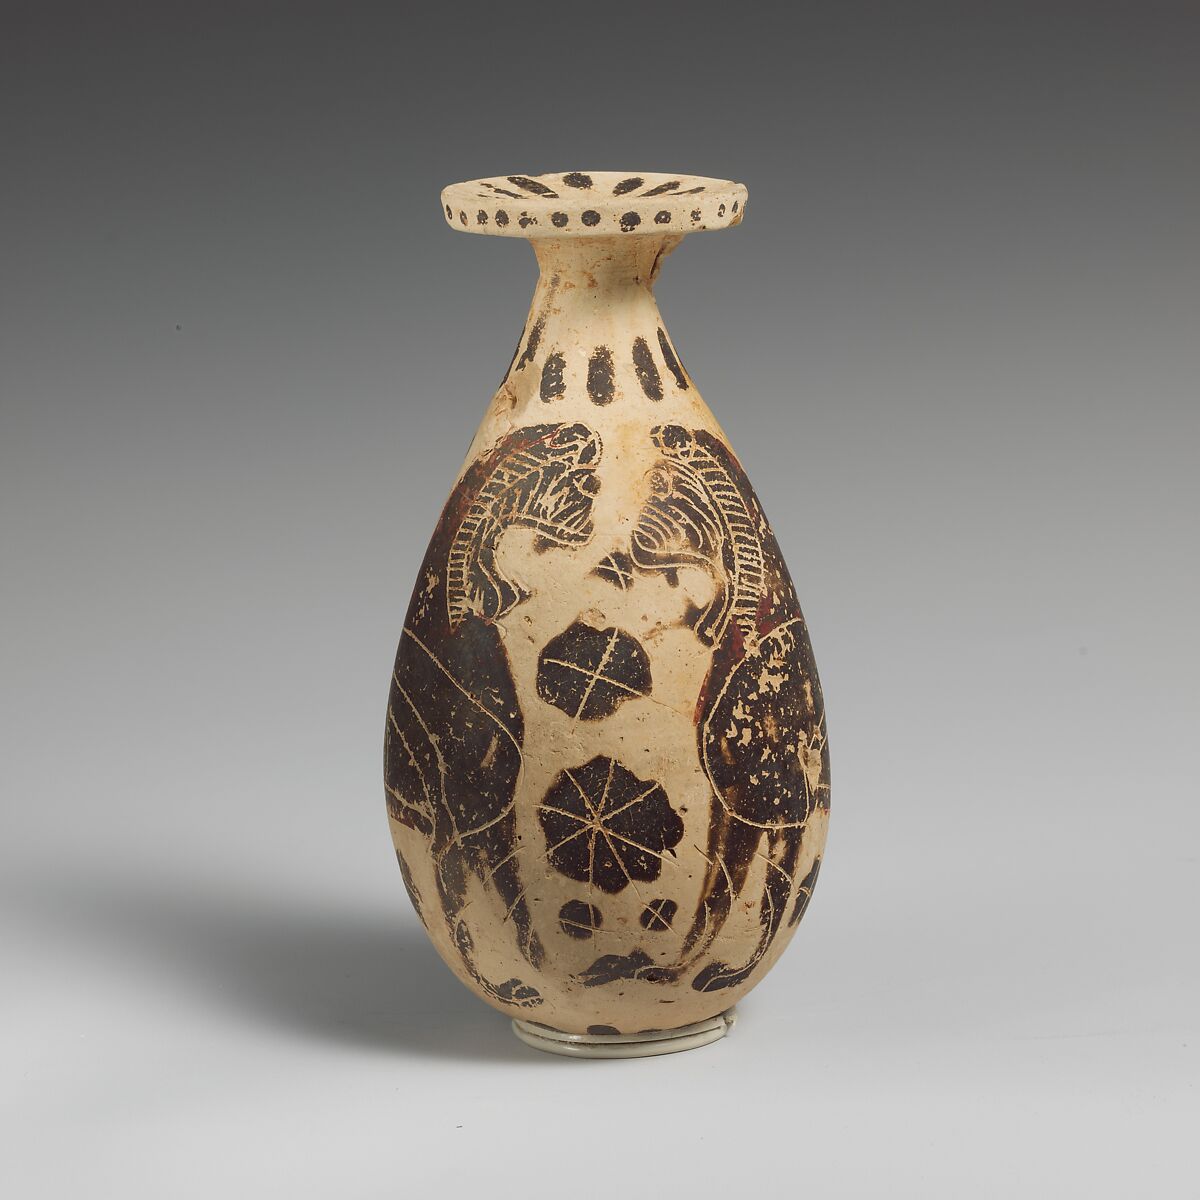 Terracotta alabastron (oil flask), Attributed to the Painter of New York 30.115.26, Terracotta, Greek, Corinthian 